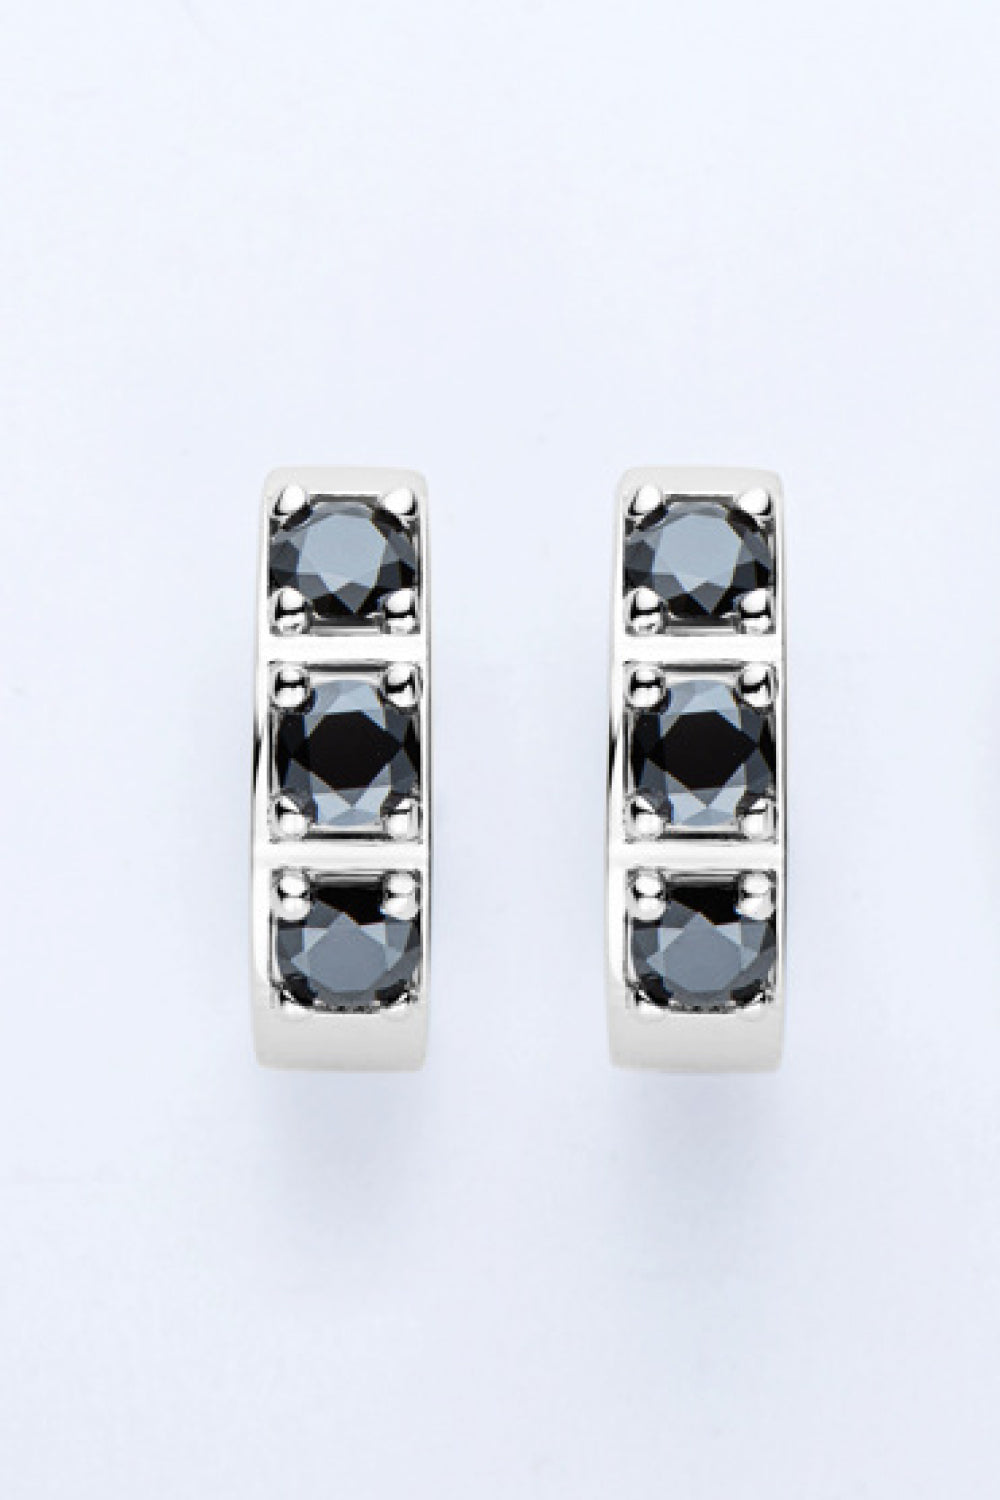 Inlaid Moissanite Huggie Earrings-Earrings-Inspired by Justeen-Women's Clothing Boutique